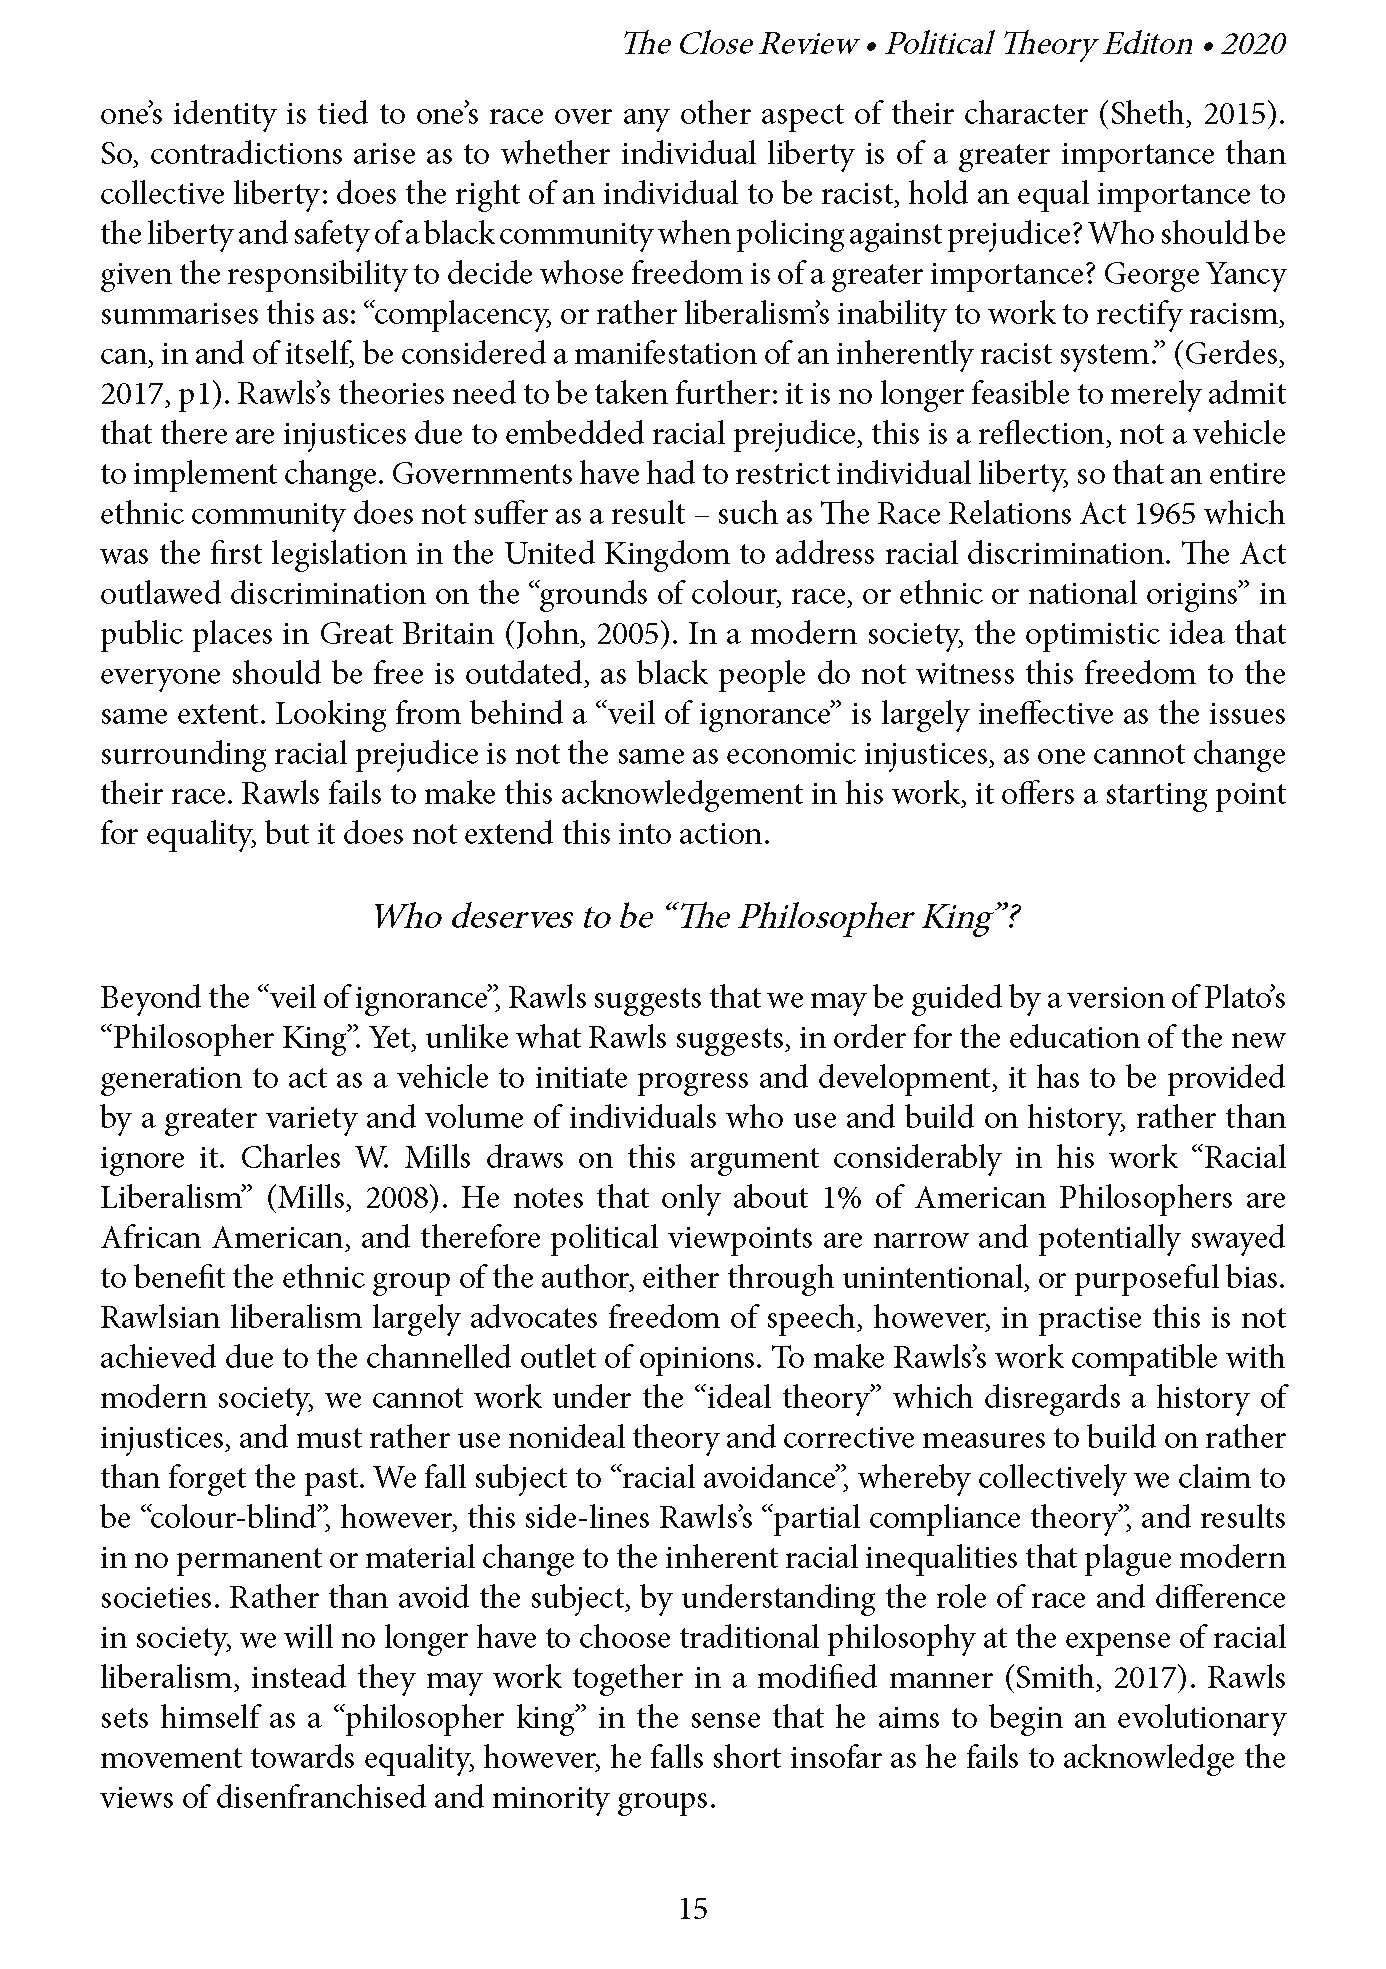 The Close Review  Political Theory Edition 2020_Page_15.jpg